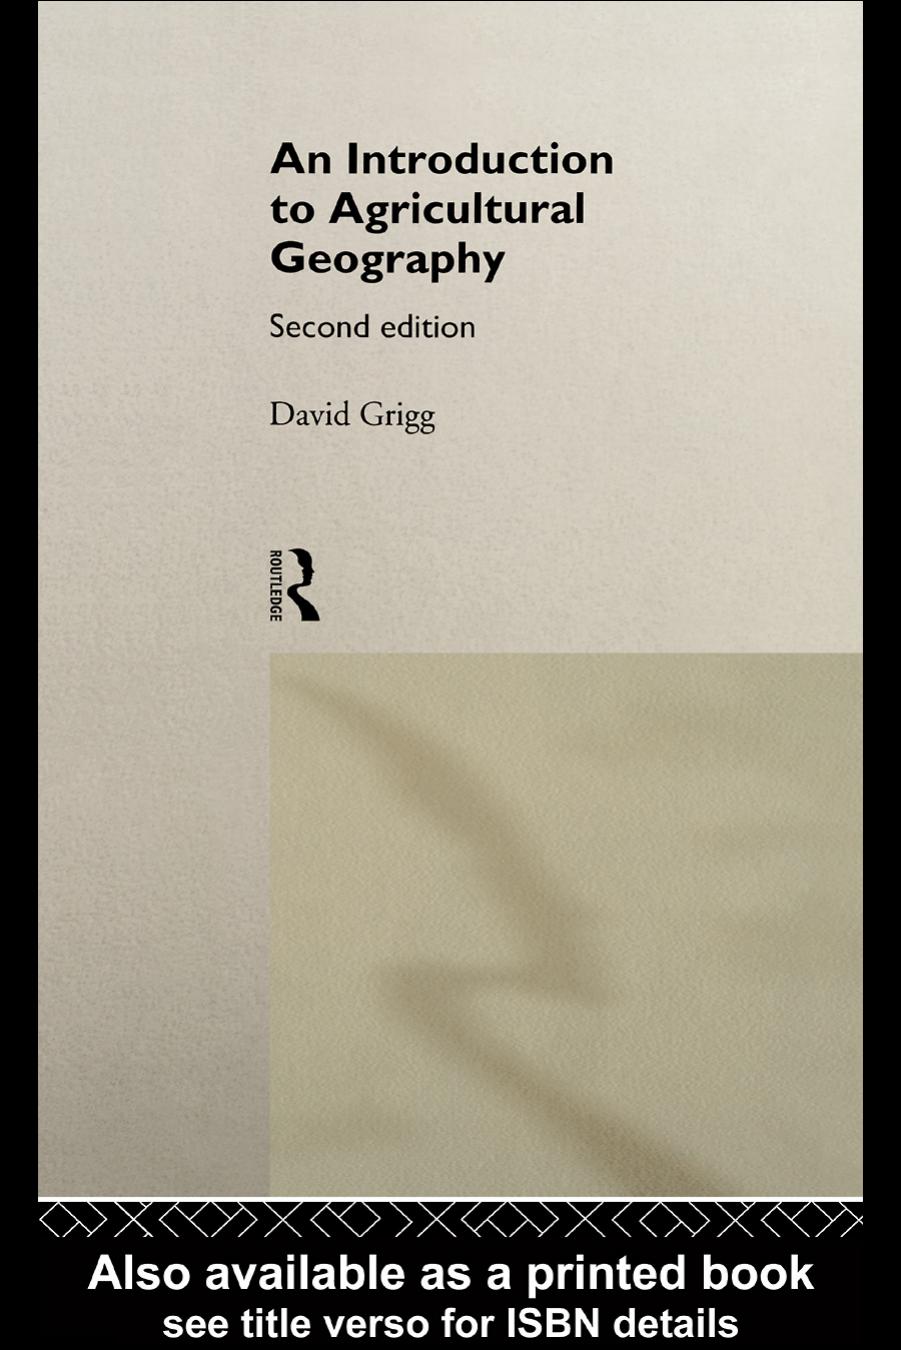 An Introduction to Agricultural Geography, Second Edition